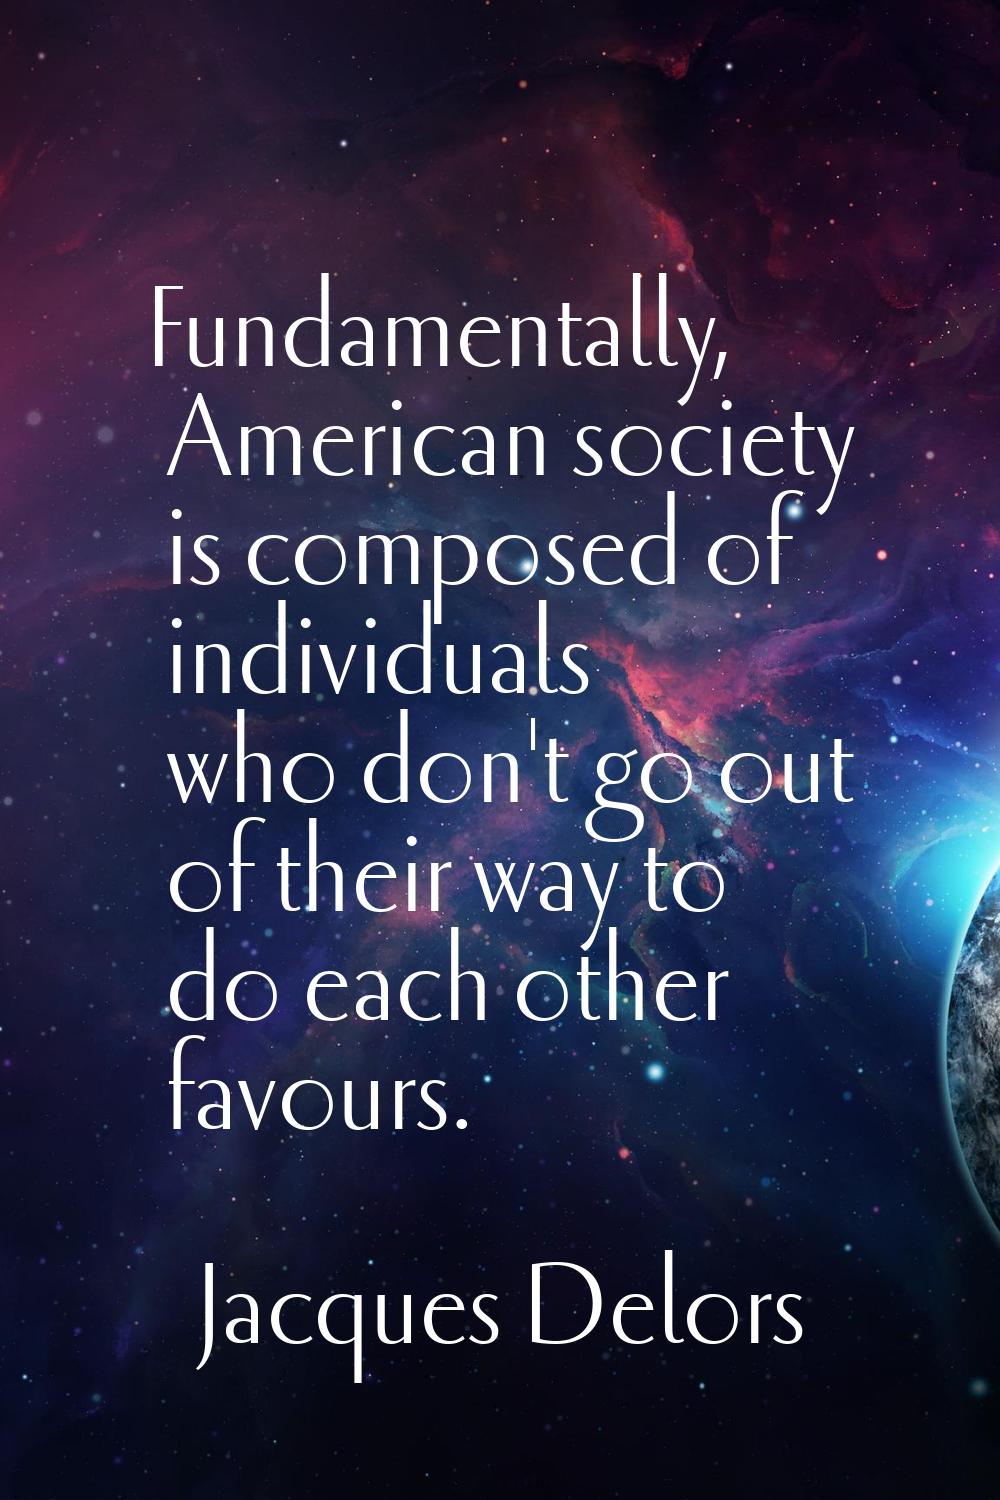 Fundamentally, American society is composed of individuals who don't go out of their way to do each